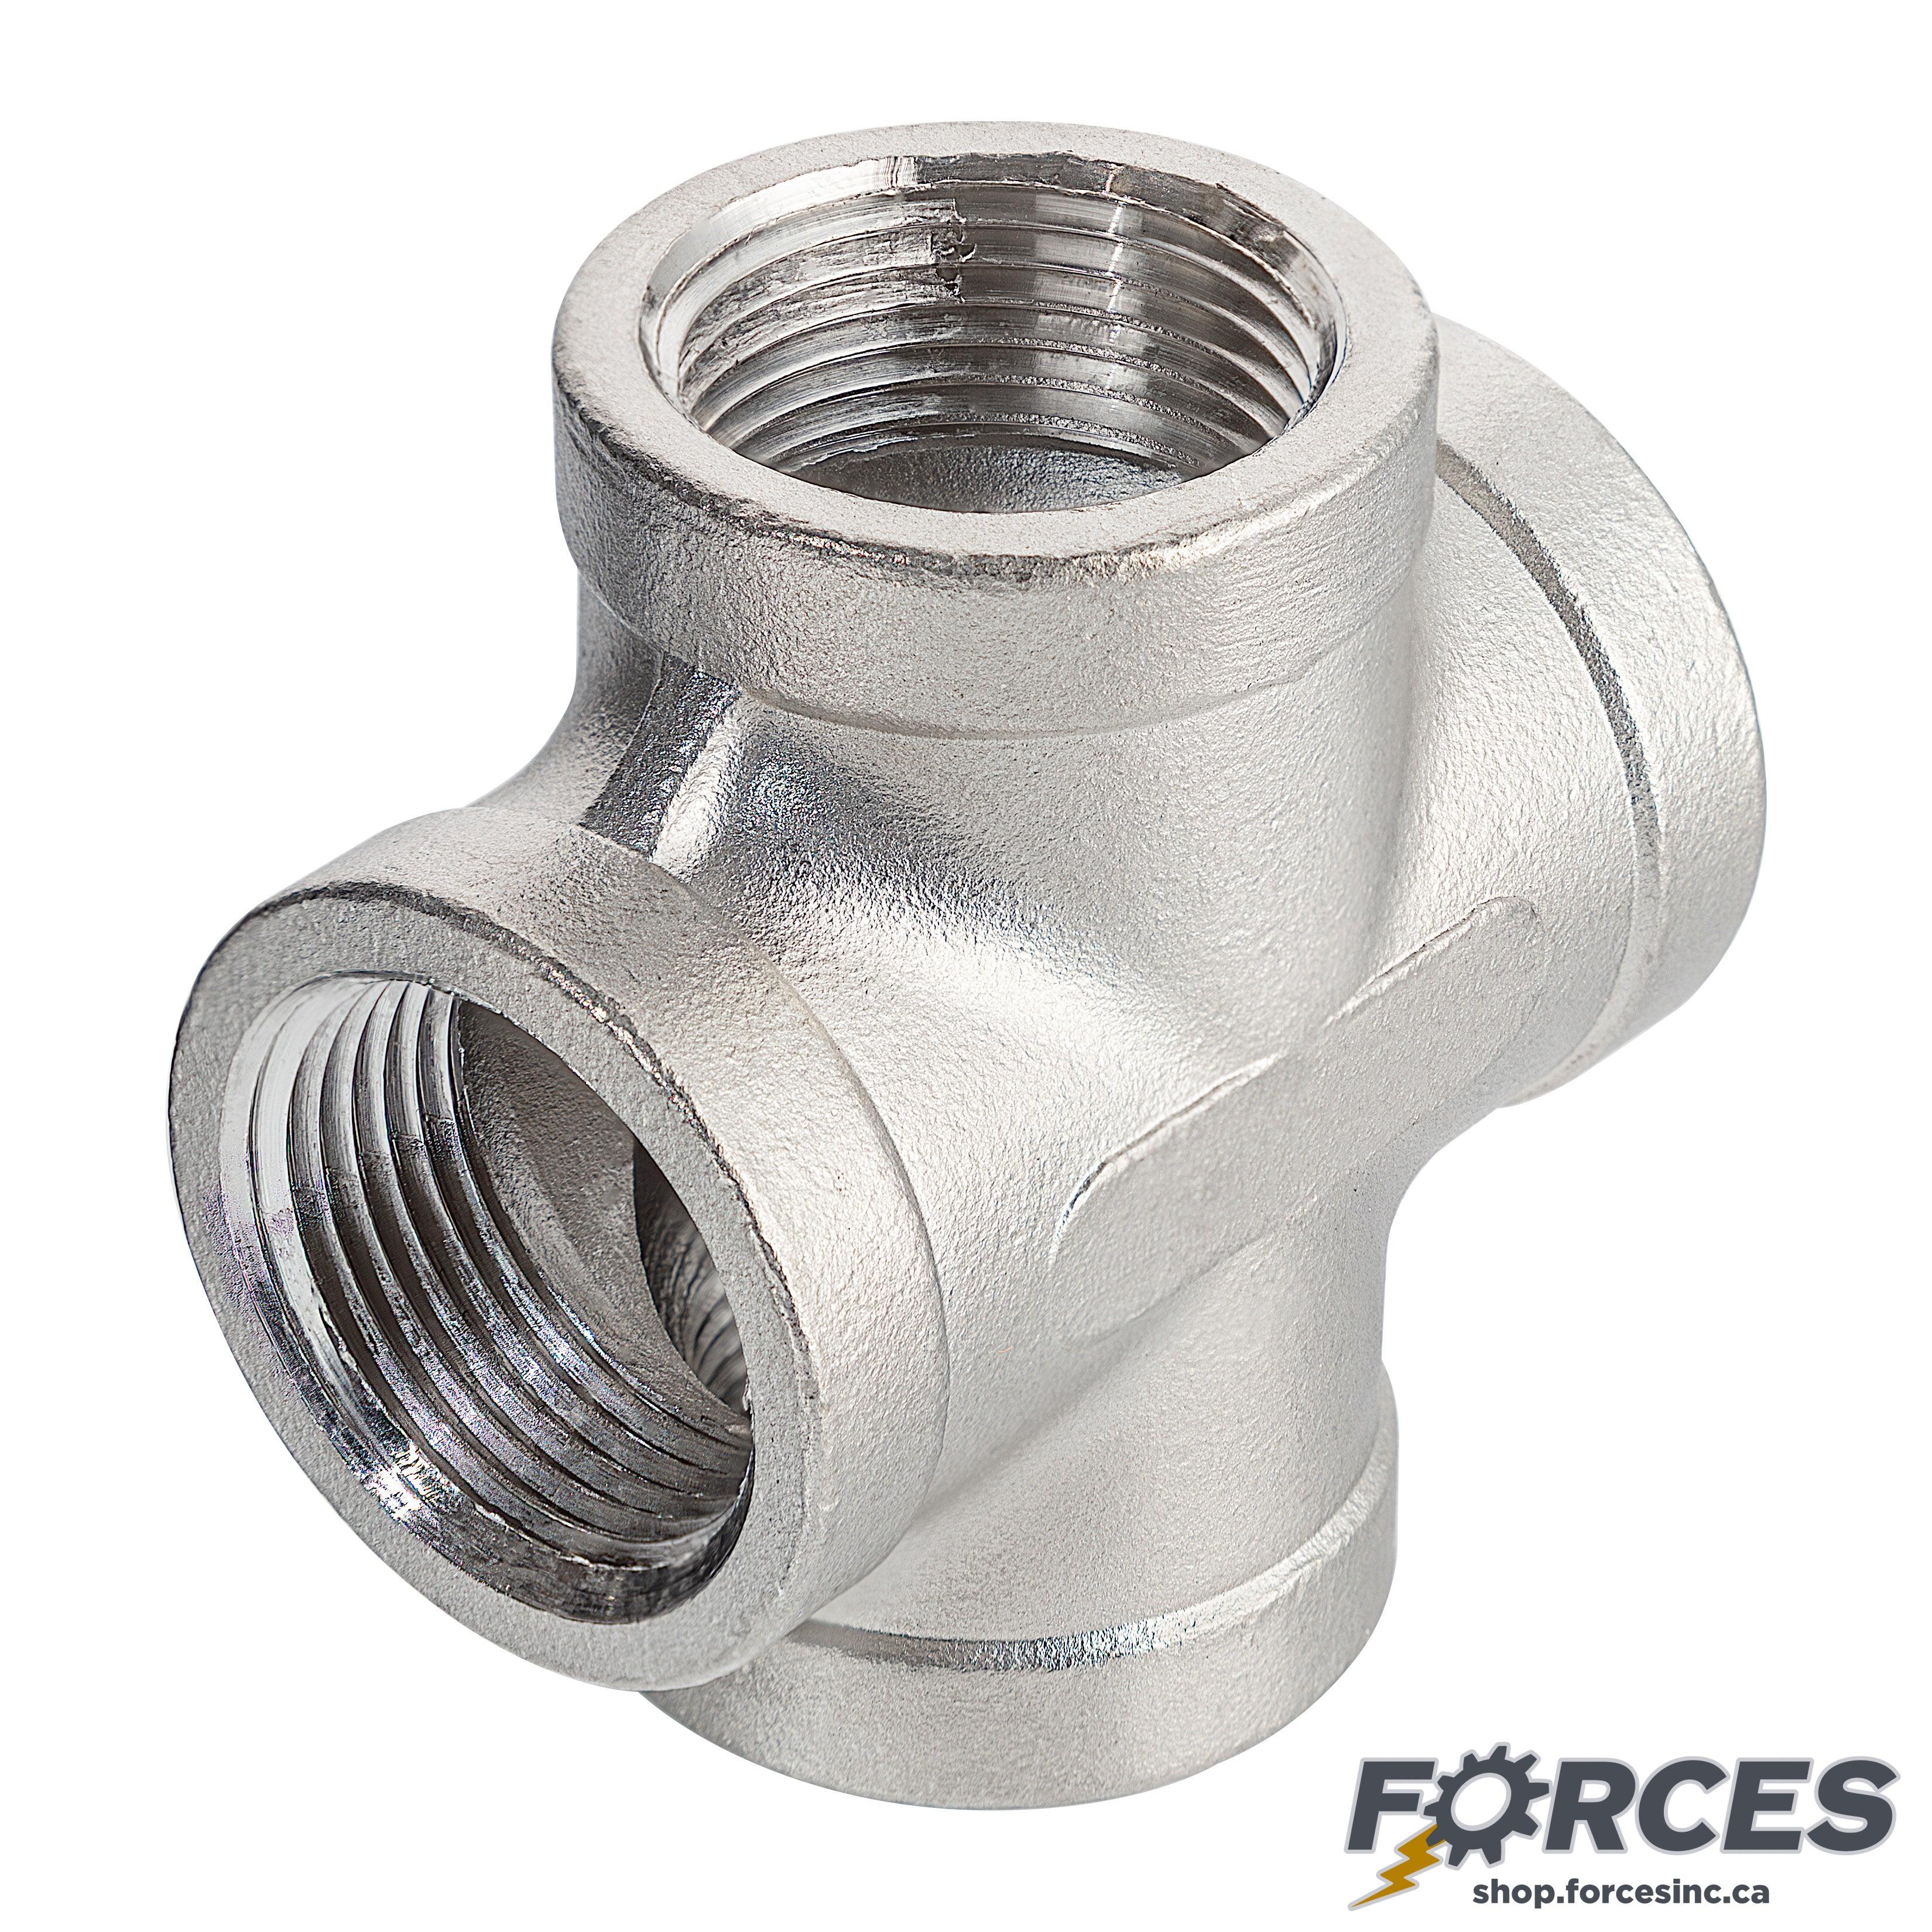 1/4" Cross NPT #150 - Stainless Steel 304 - Forces Inc